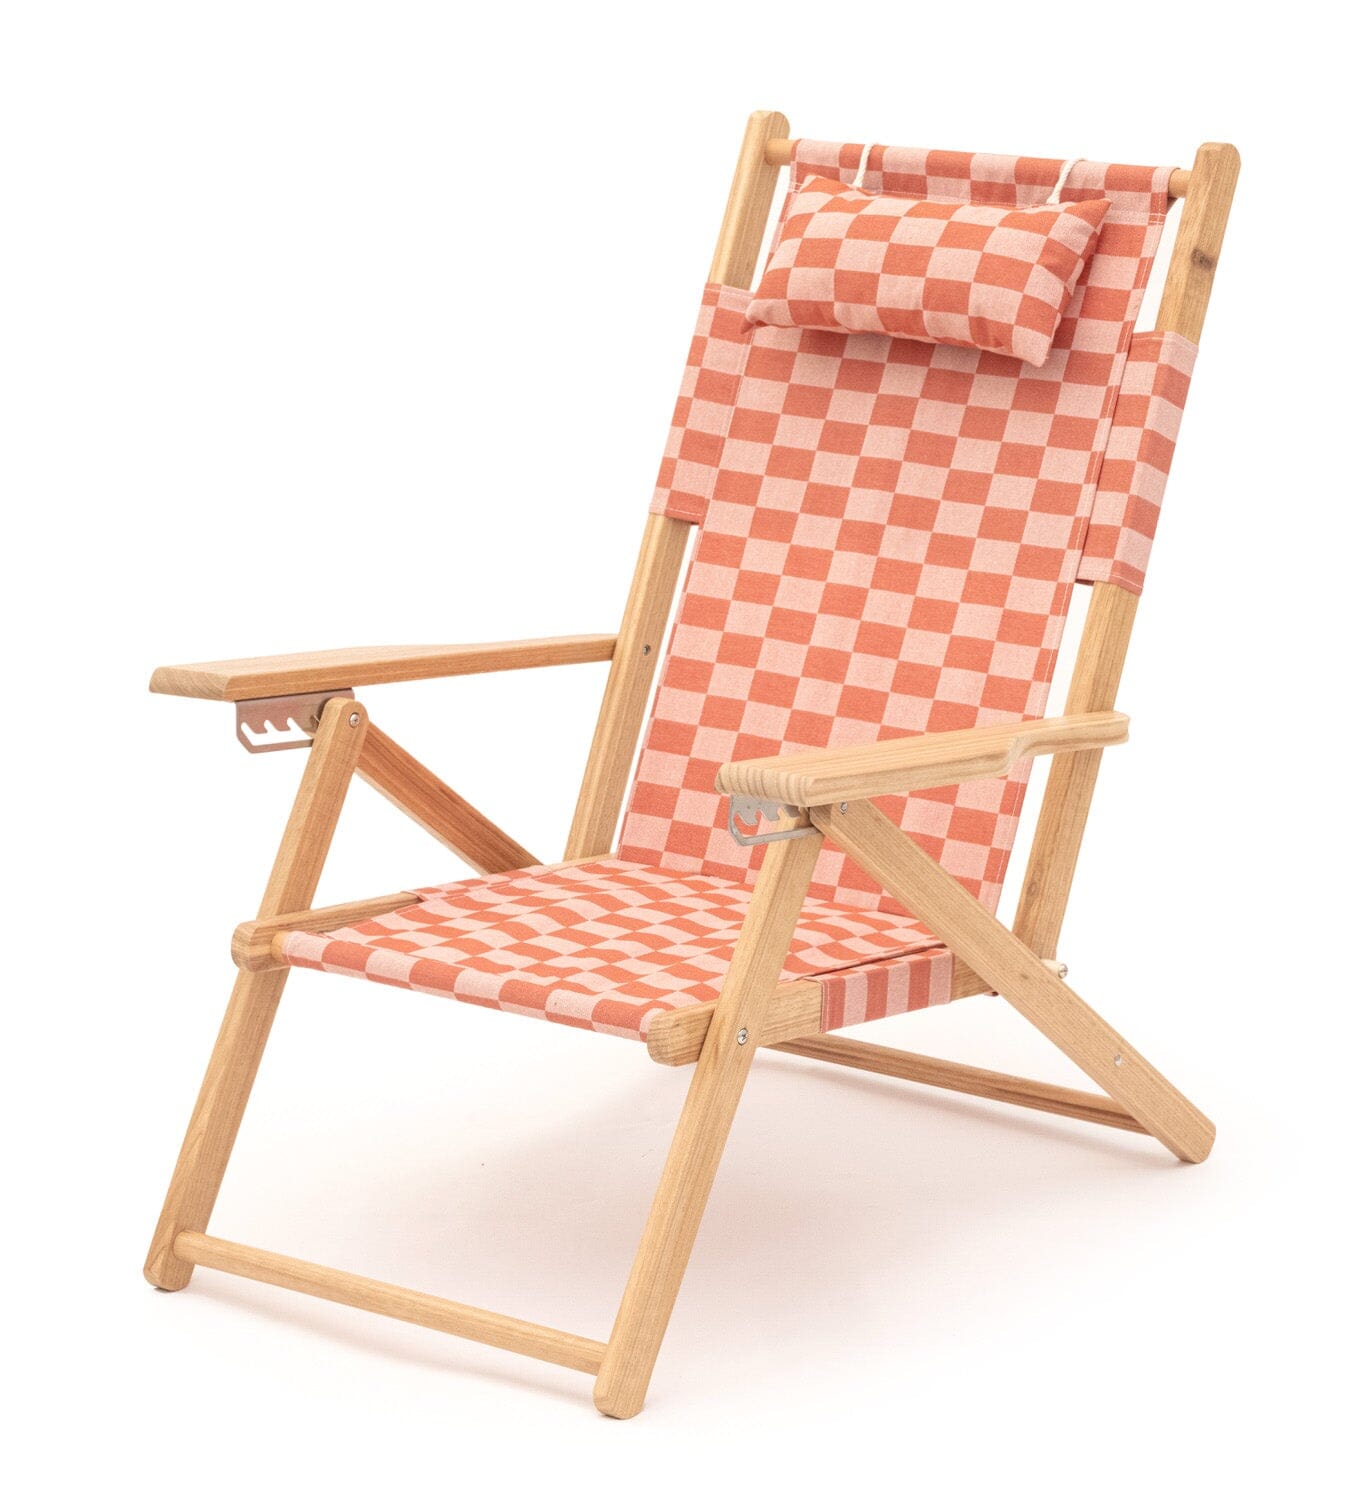 The Tommy Chair - Le Sirenuse Check